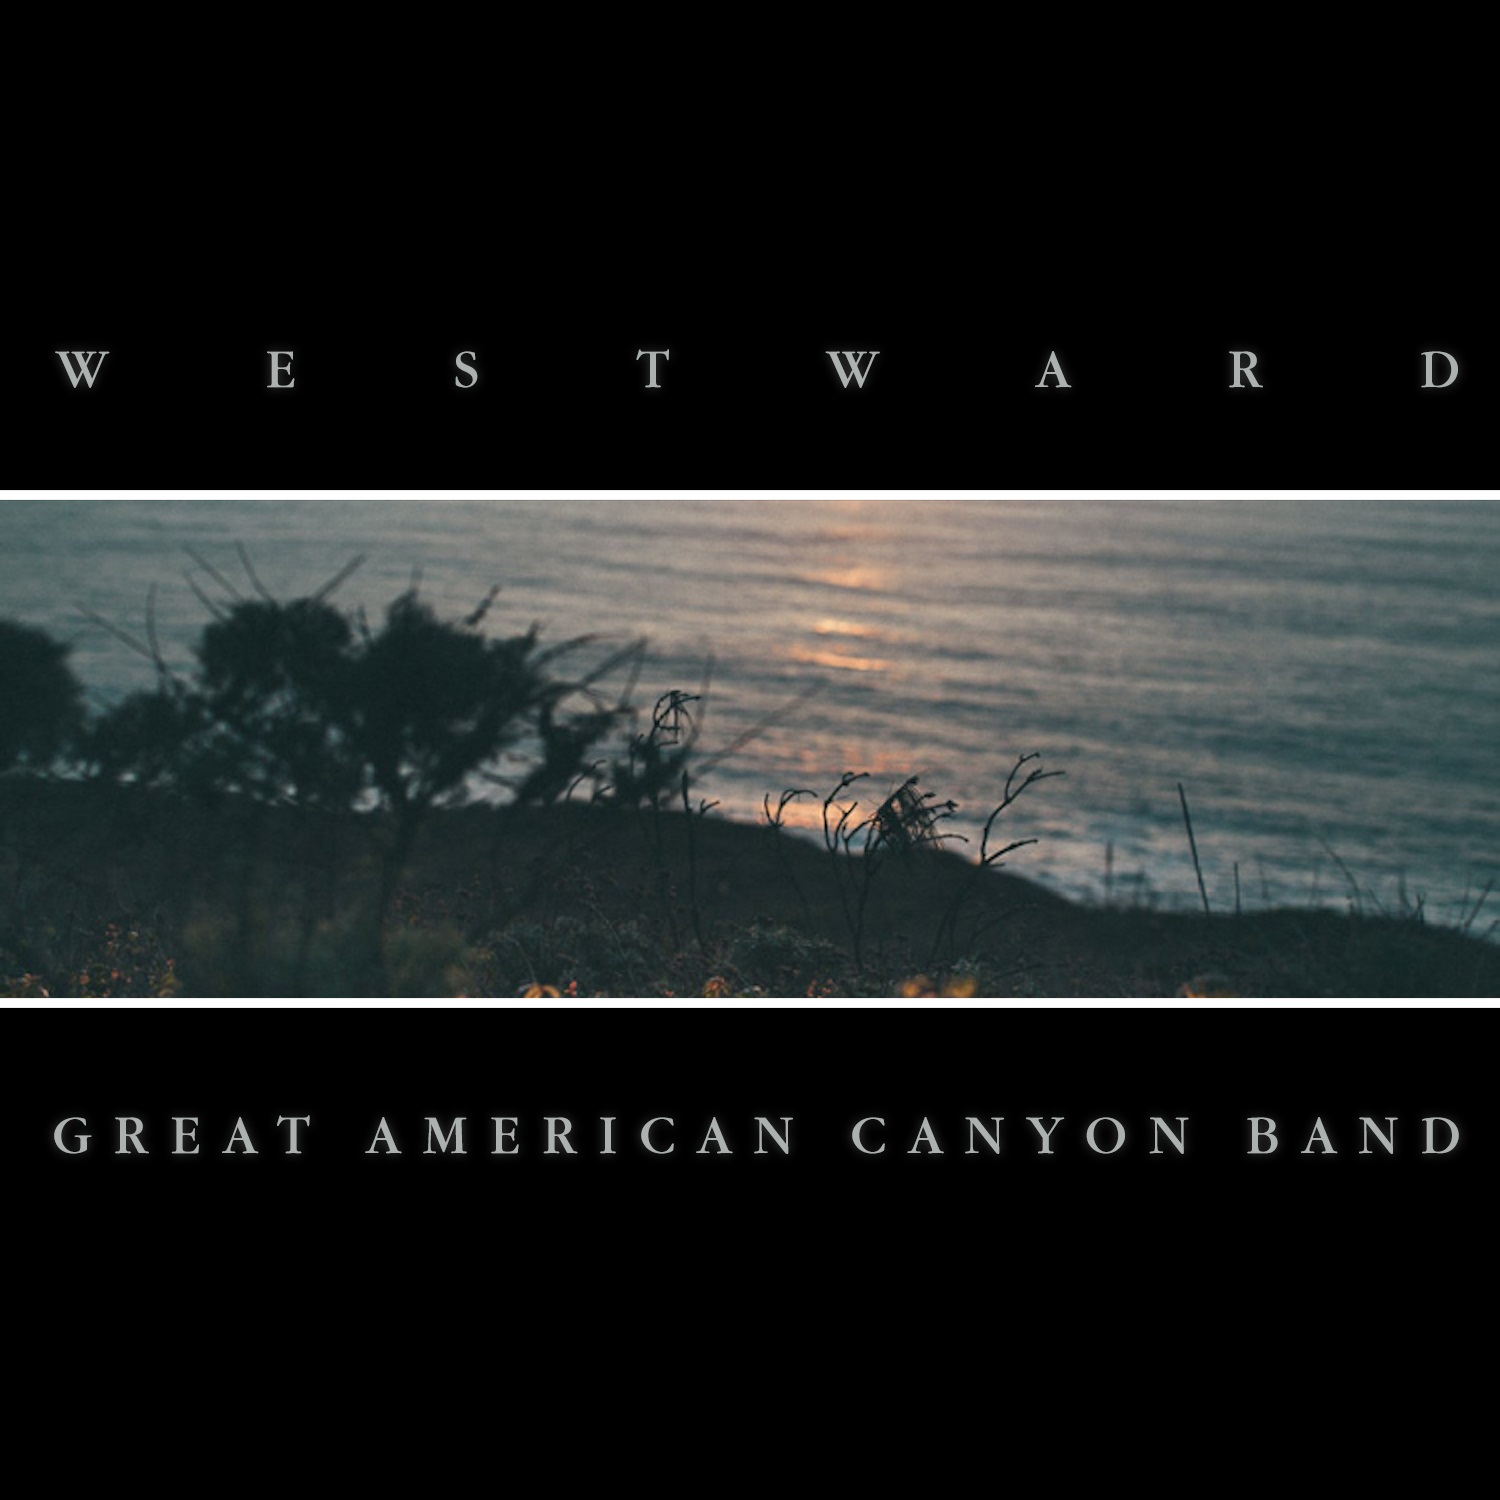 Great American Canyon Band x Noisetrade present Westward (free download)